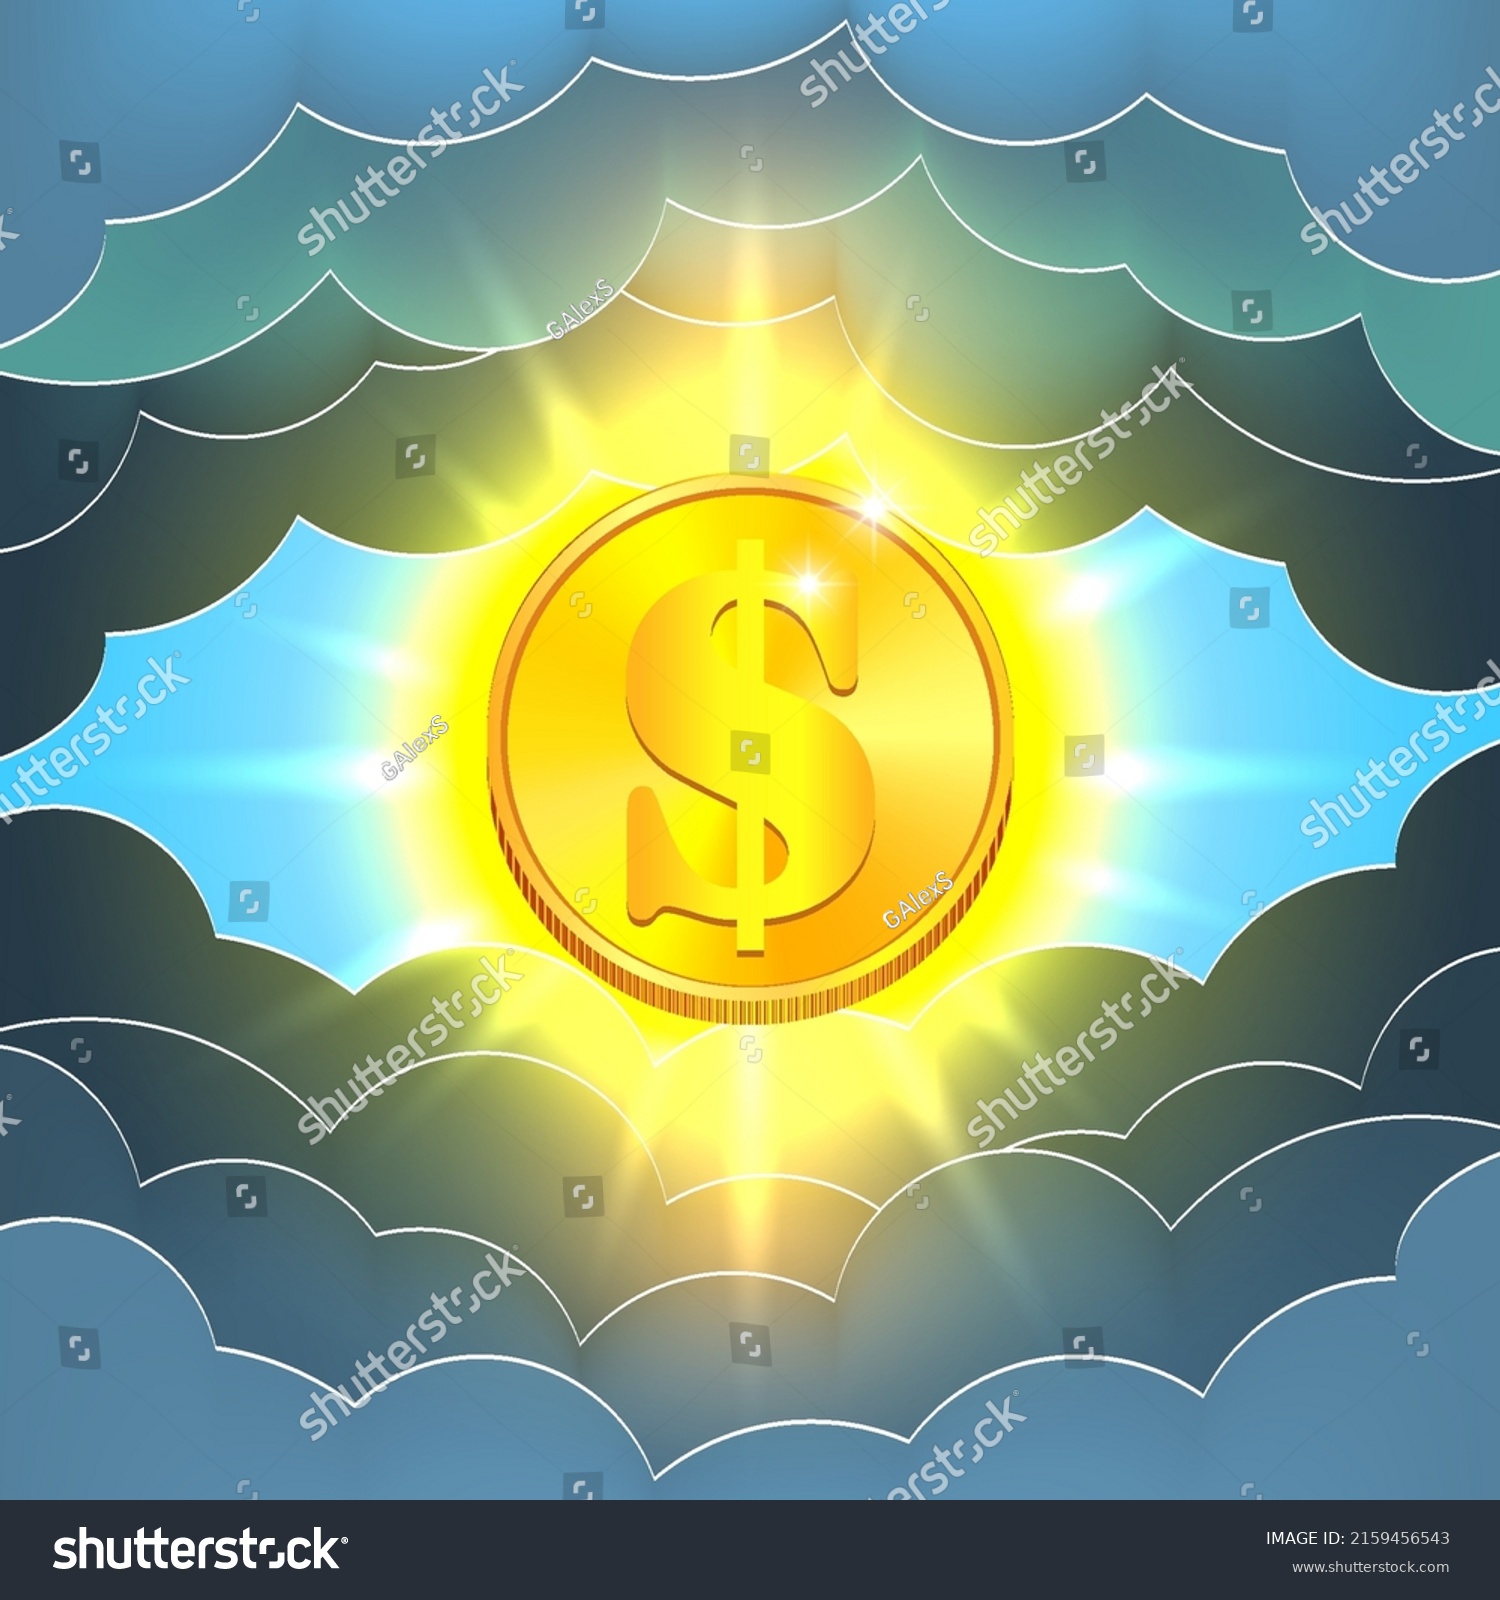 SVG of Vector golden brightly glowing radiant dollar coin in dark stylistic clouds svg